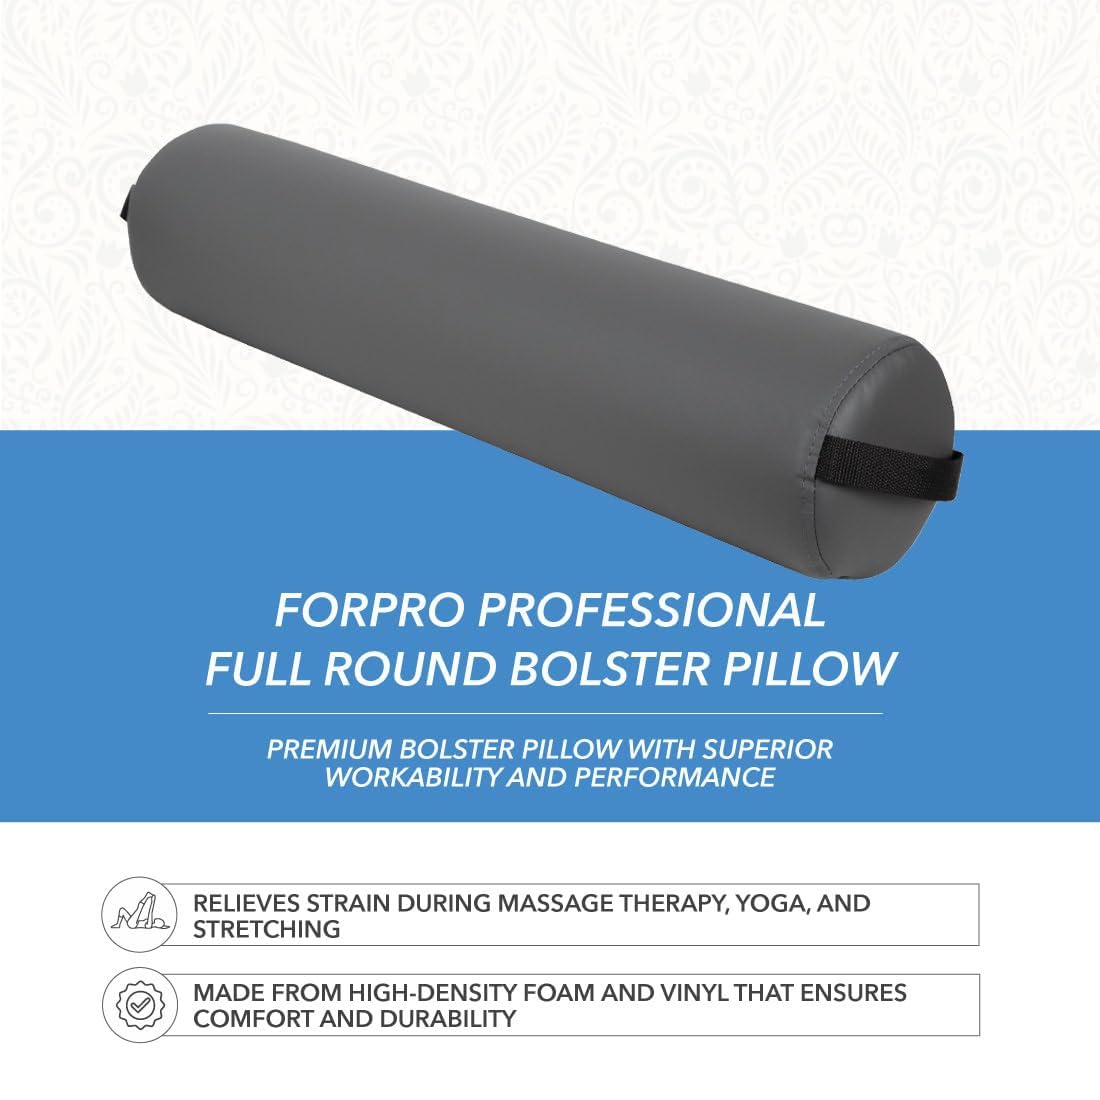 ForPro Full Round Bolster Pillow, Cool Grey, Oil and Stain-Resistant, for Massage and Yoga, 6” R x 26” L